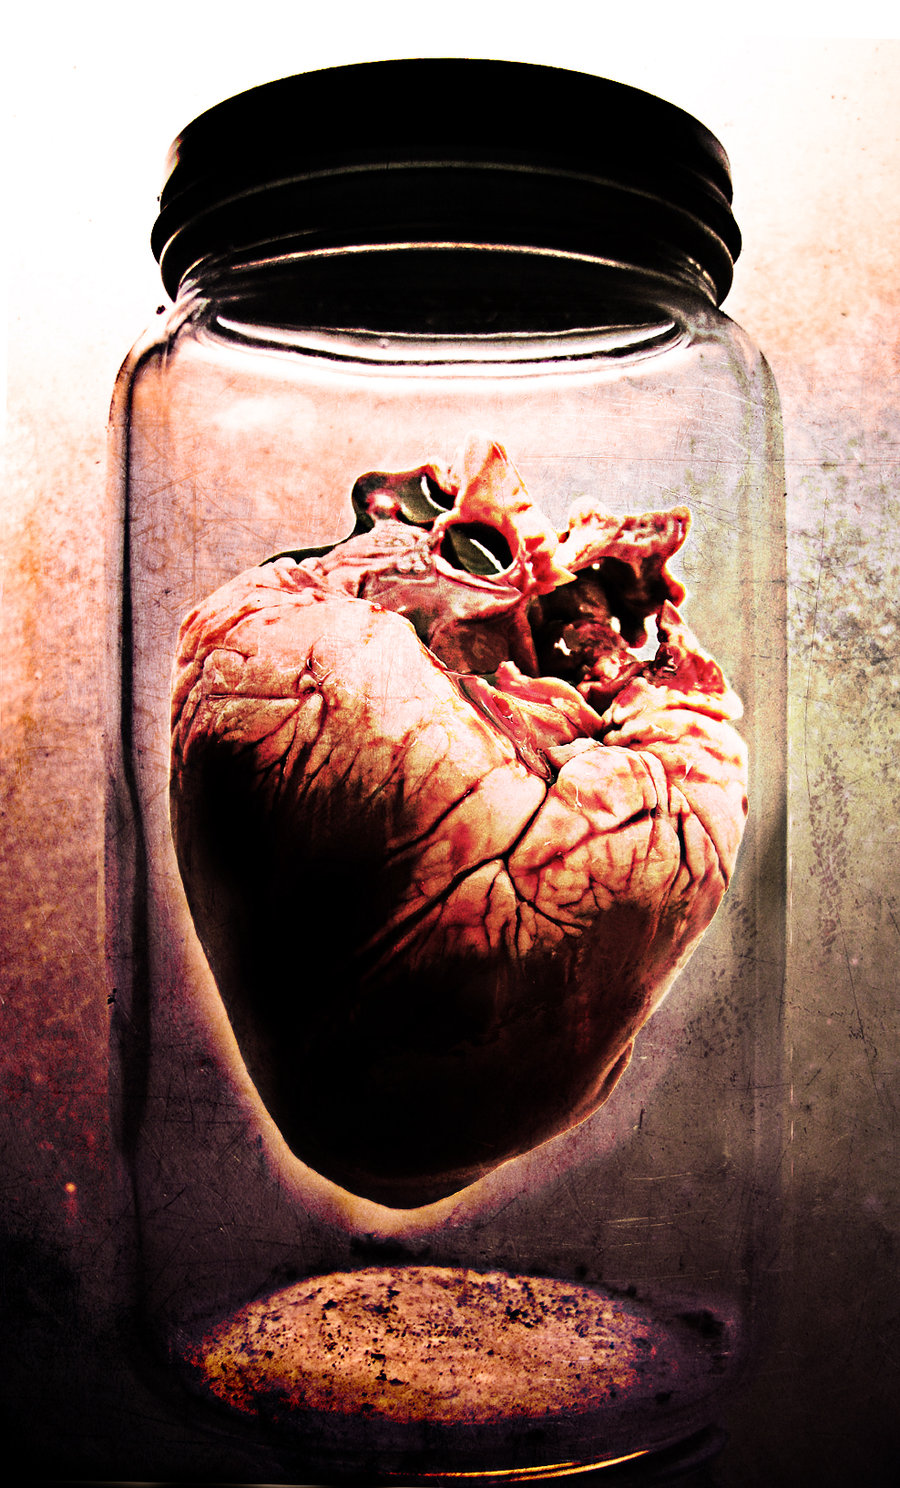 All I adore Jar_of_hearts_by_meandarksmile-d36ul8g